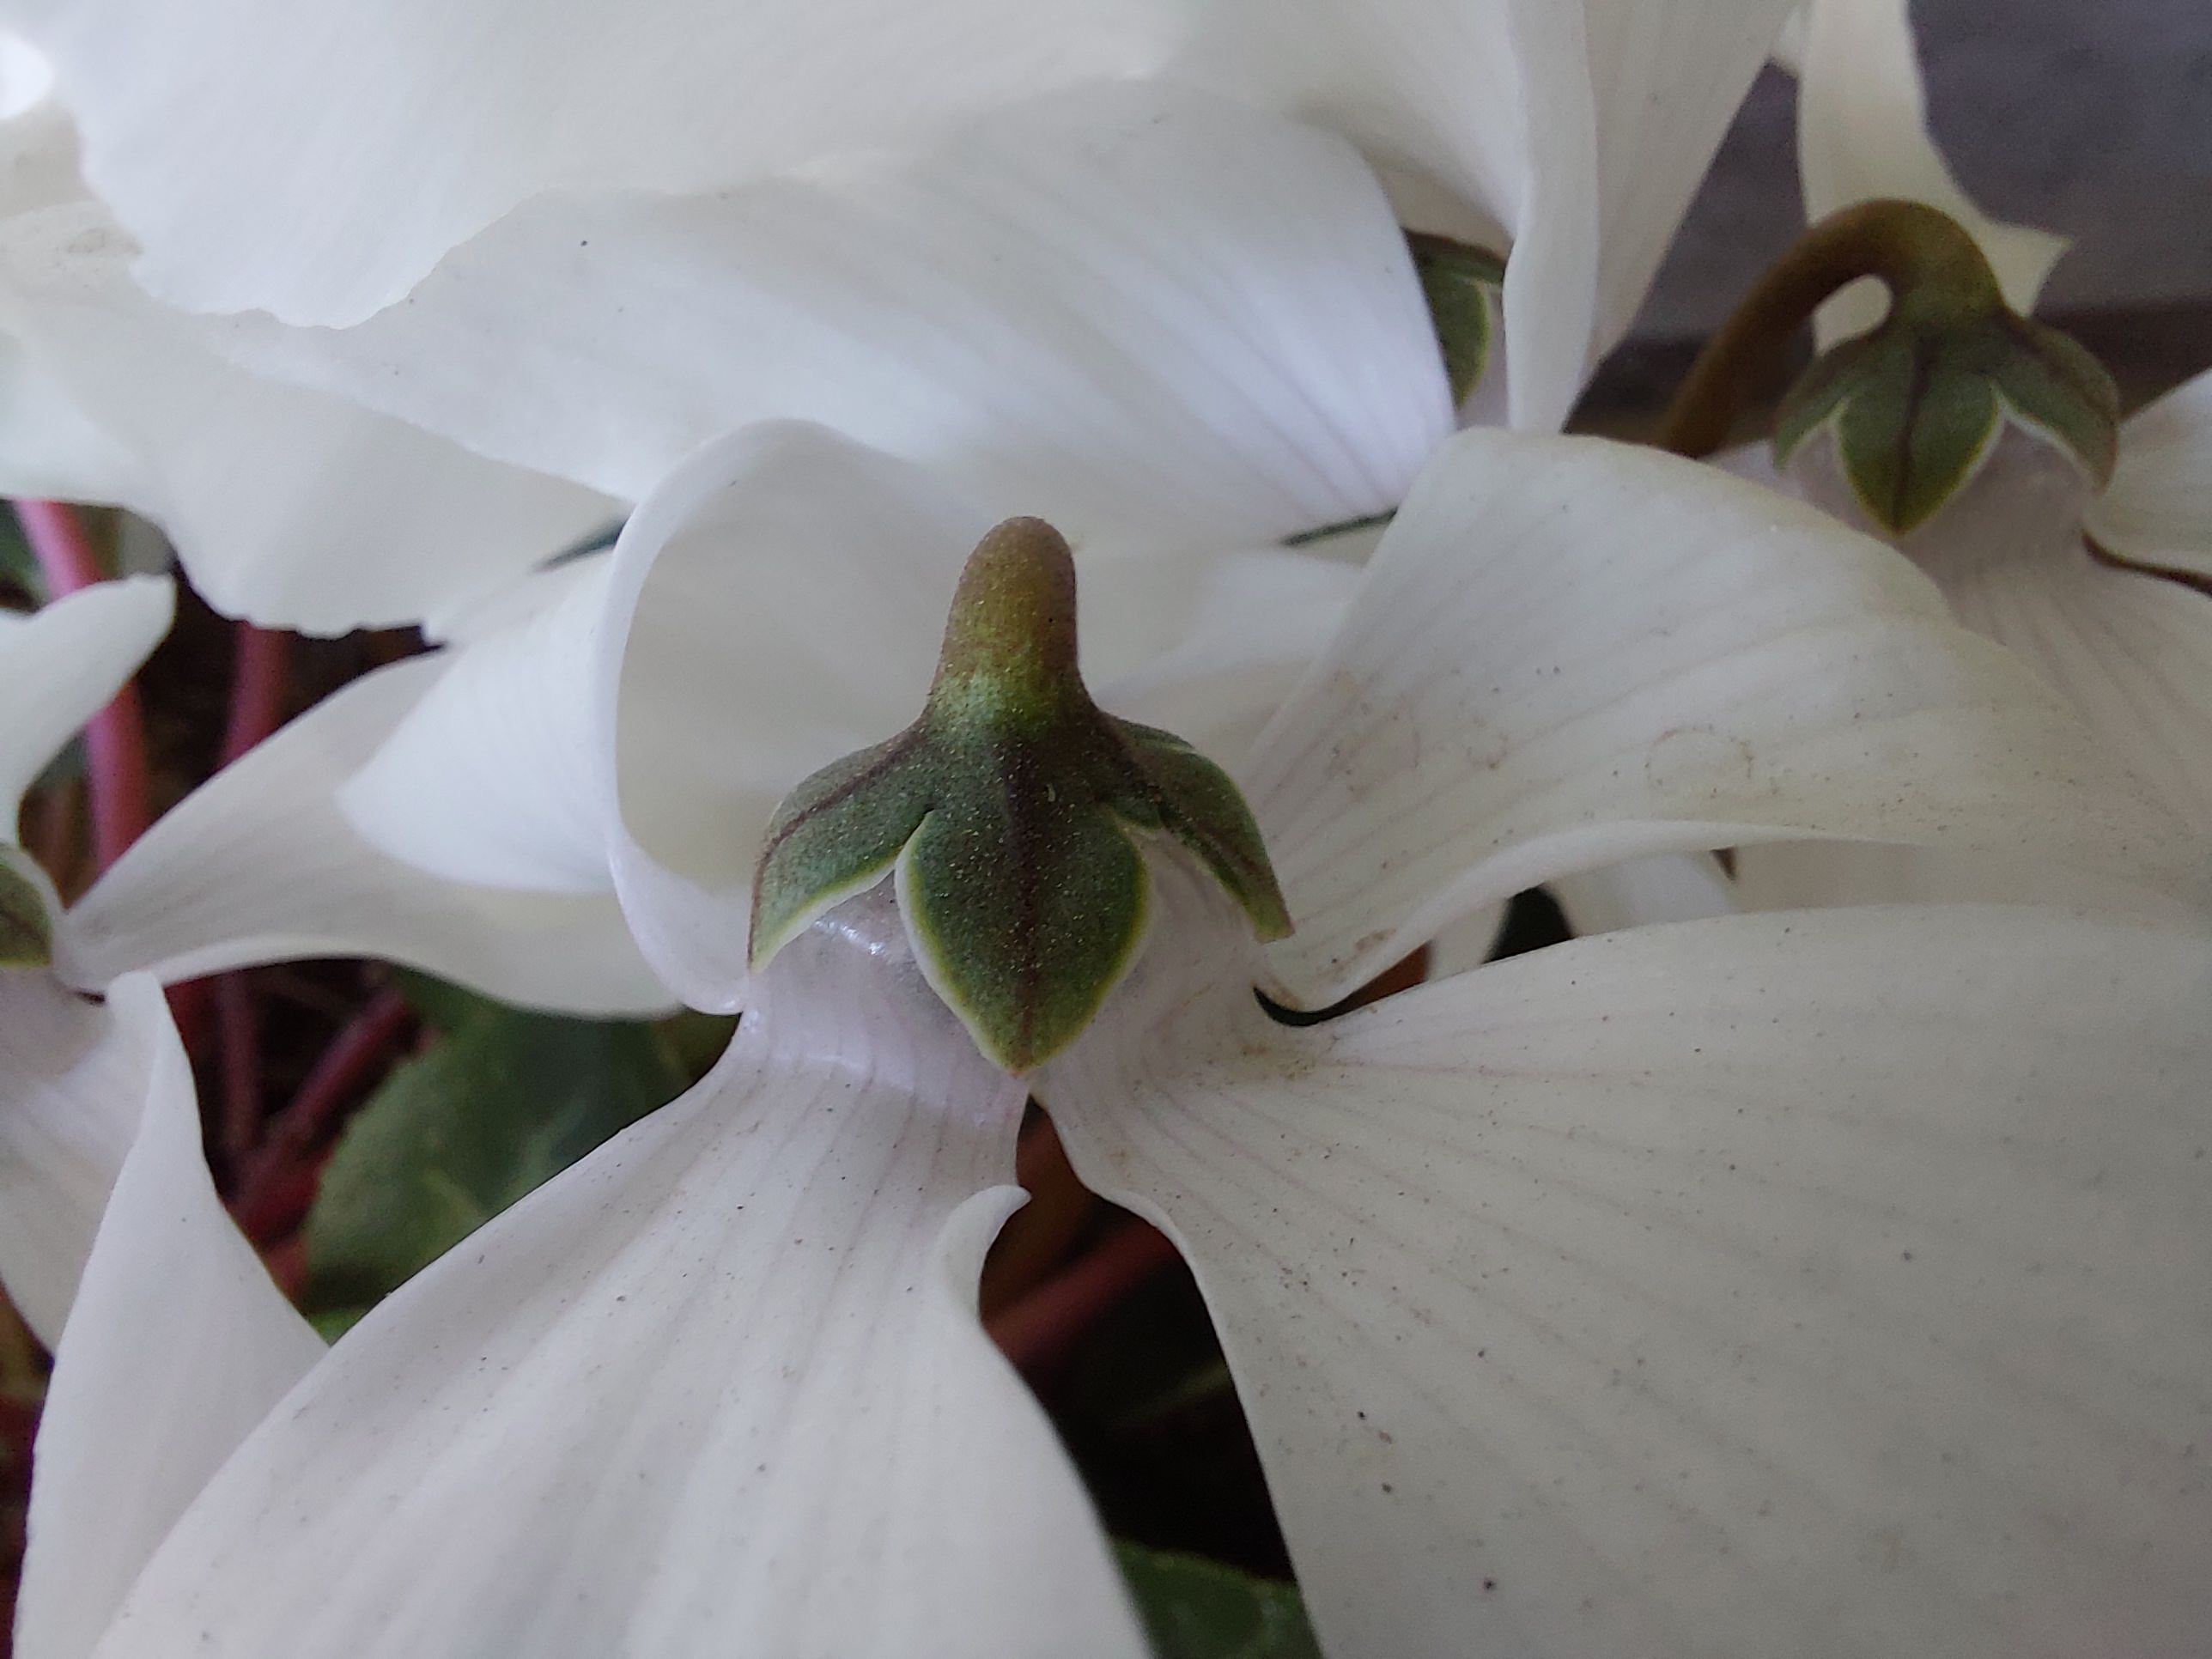 Sample photo of the Galaxy A72 macro camera - a white flower up close